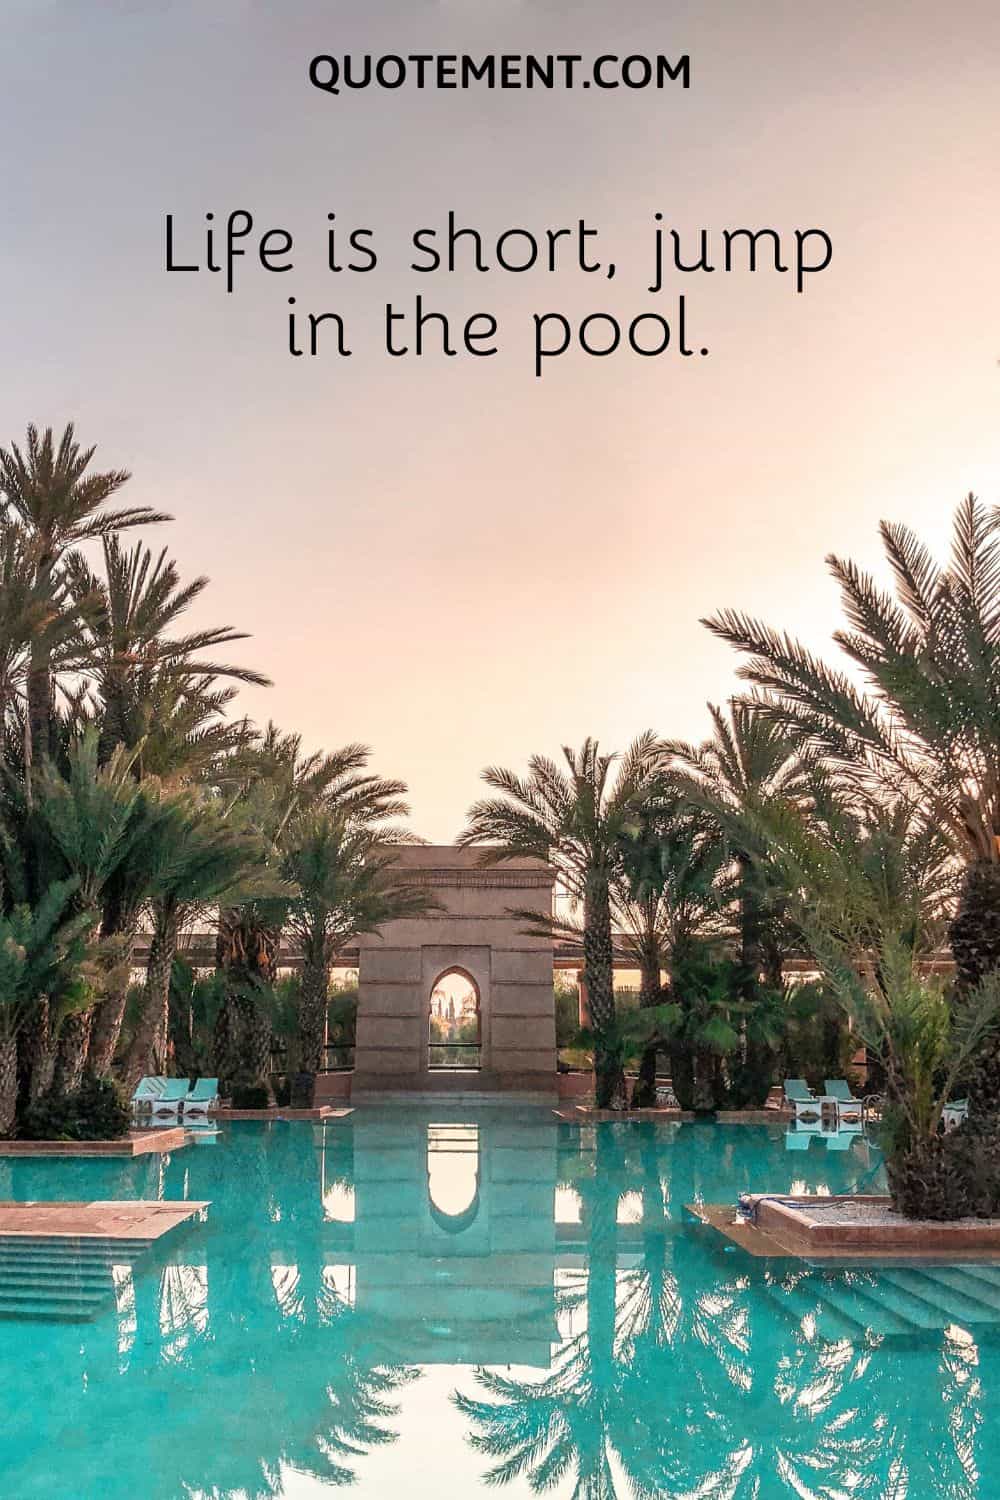 Life is short, jump in the pool.